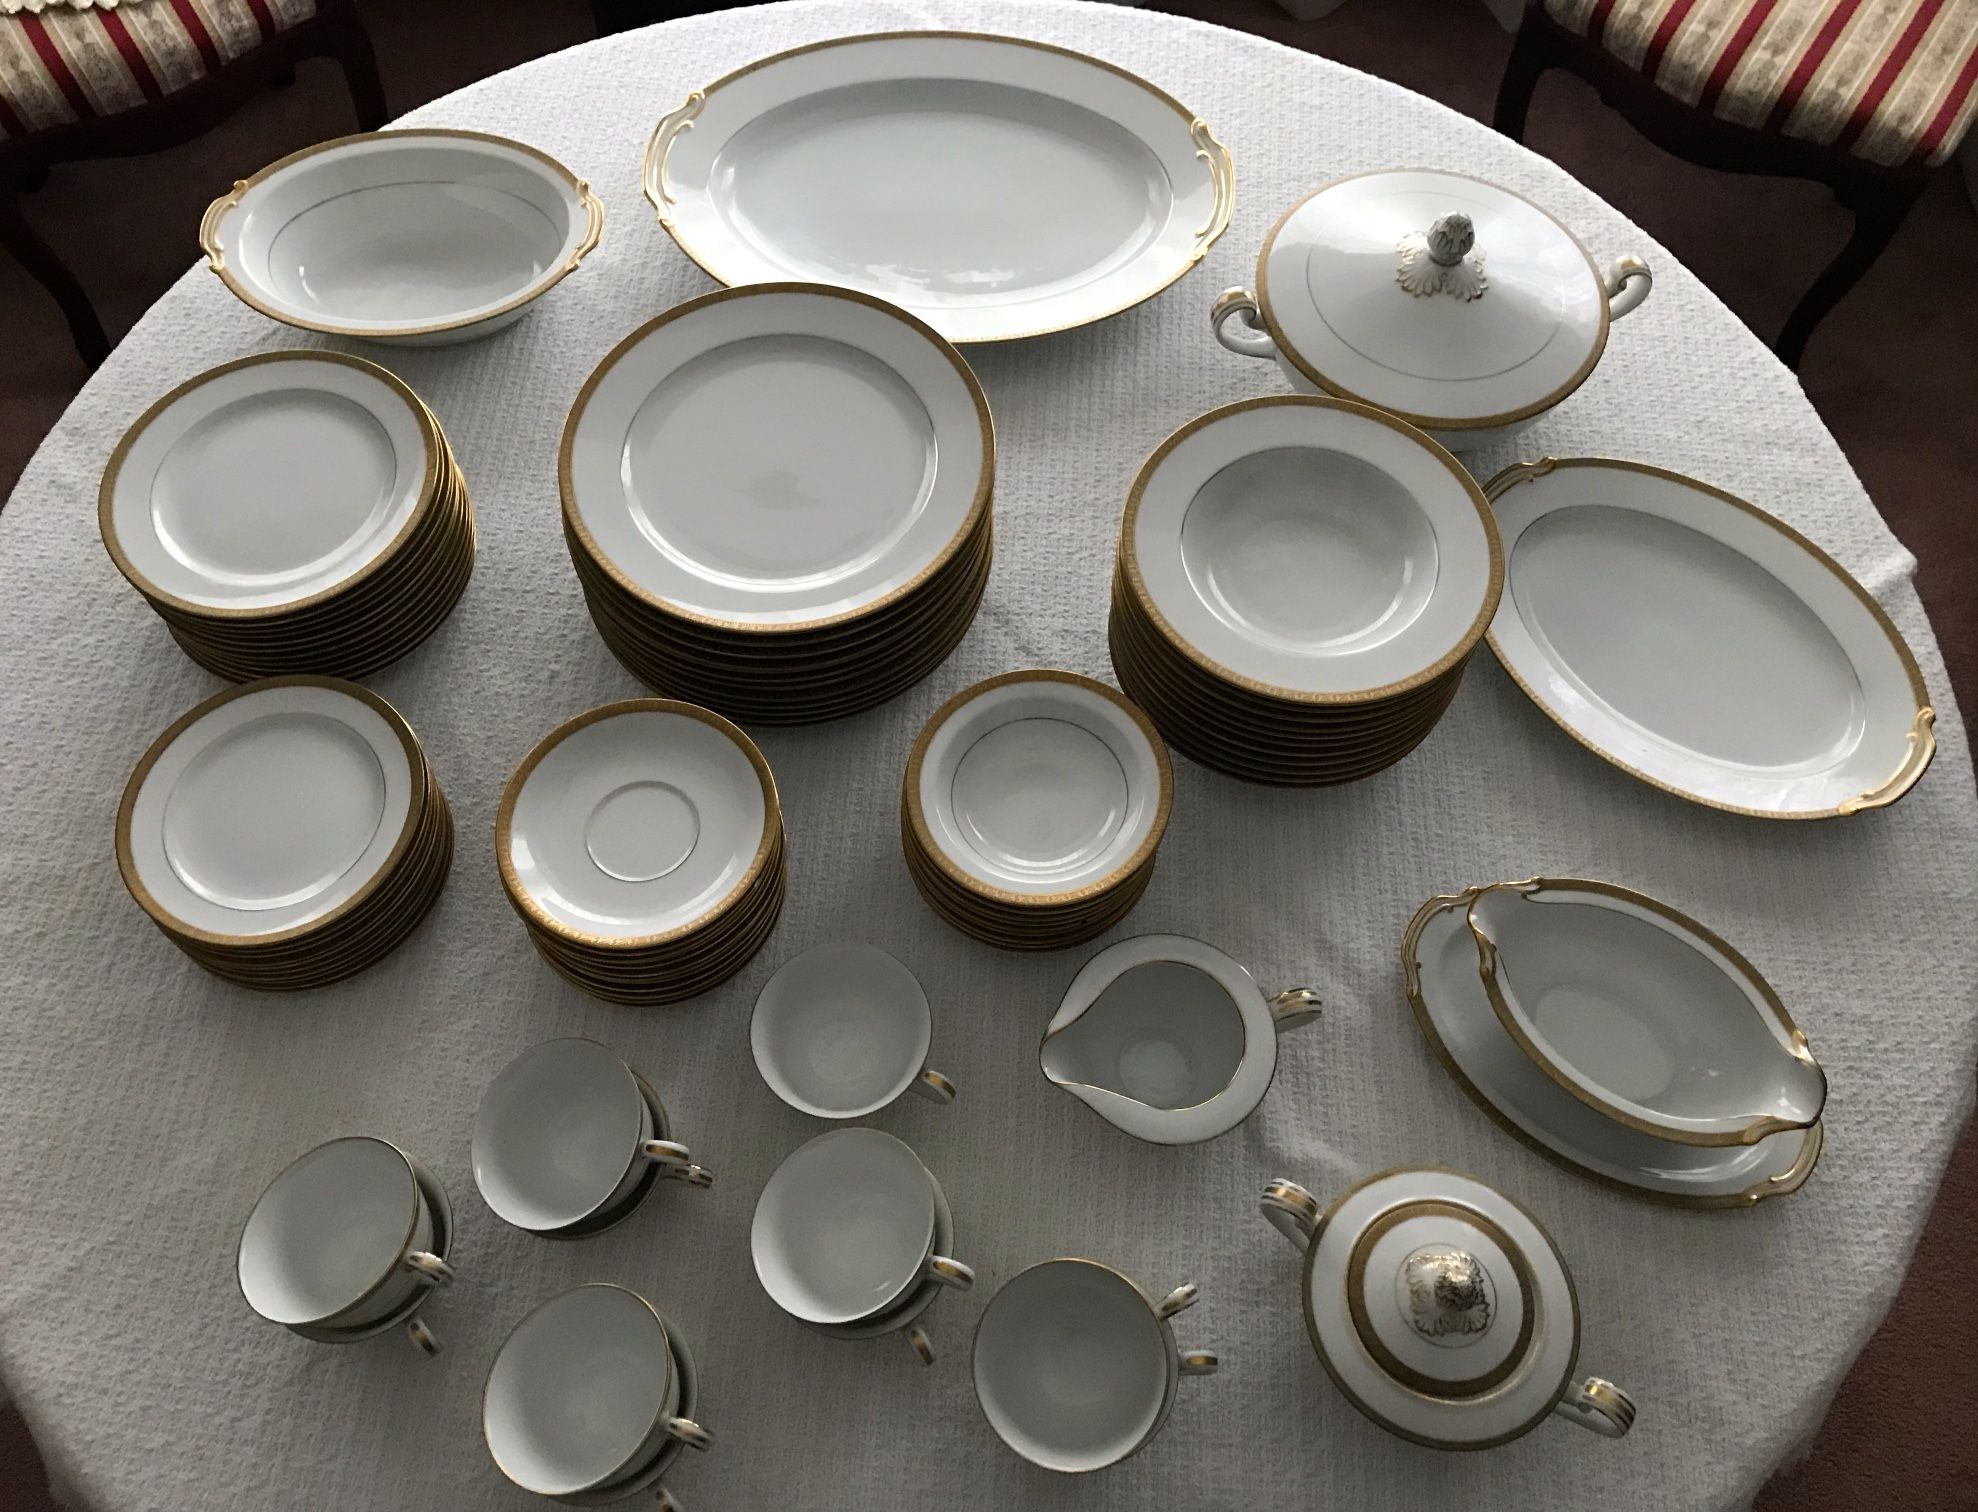 Noritake Bone China - 12 Place Setting and Accessories - 84 Pieces - Occupied Japan - 24-K Gold